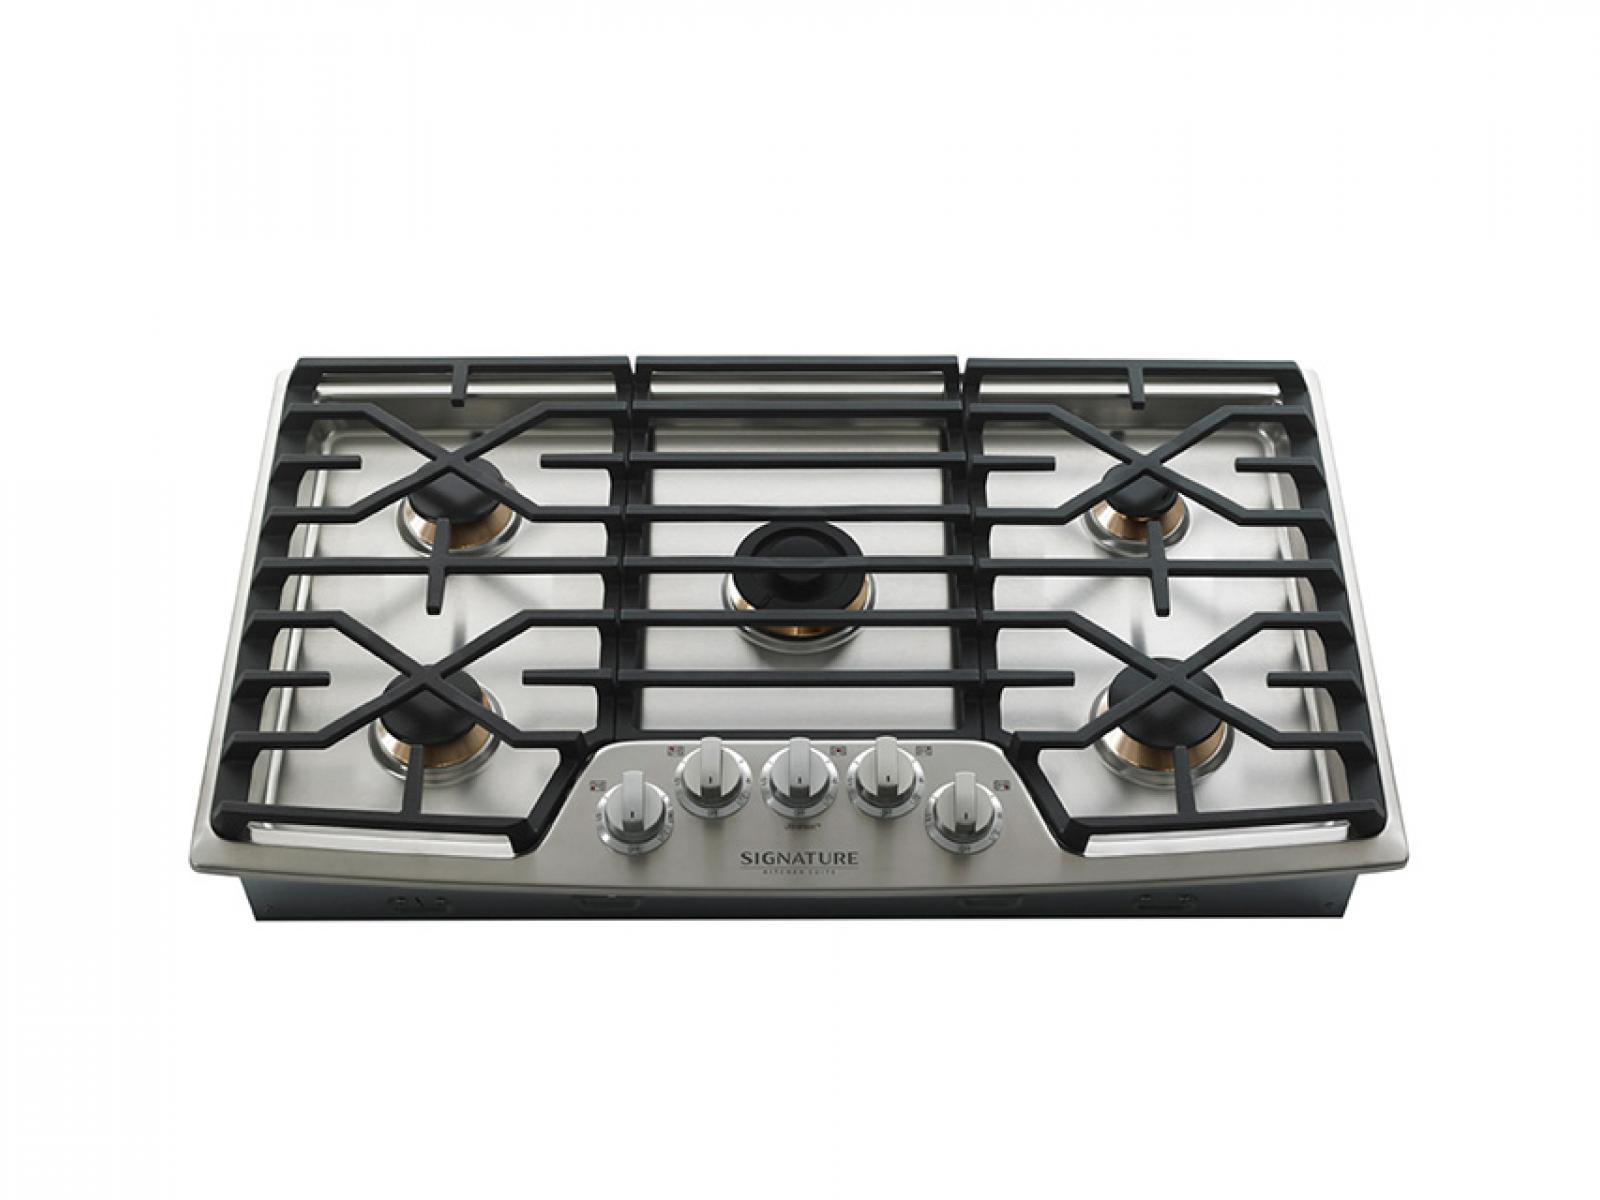 30-inch Gas Cooktop